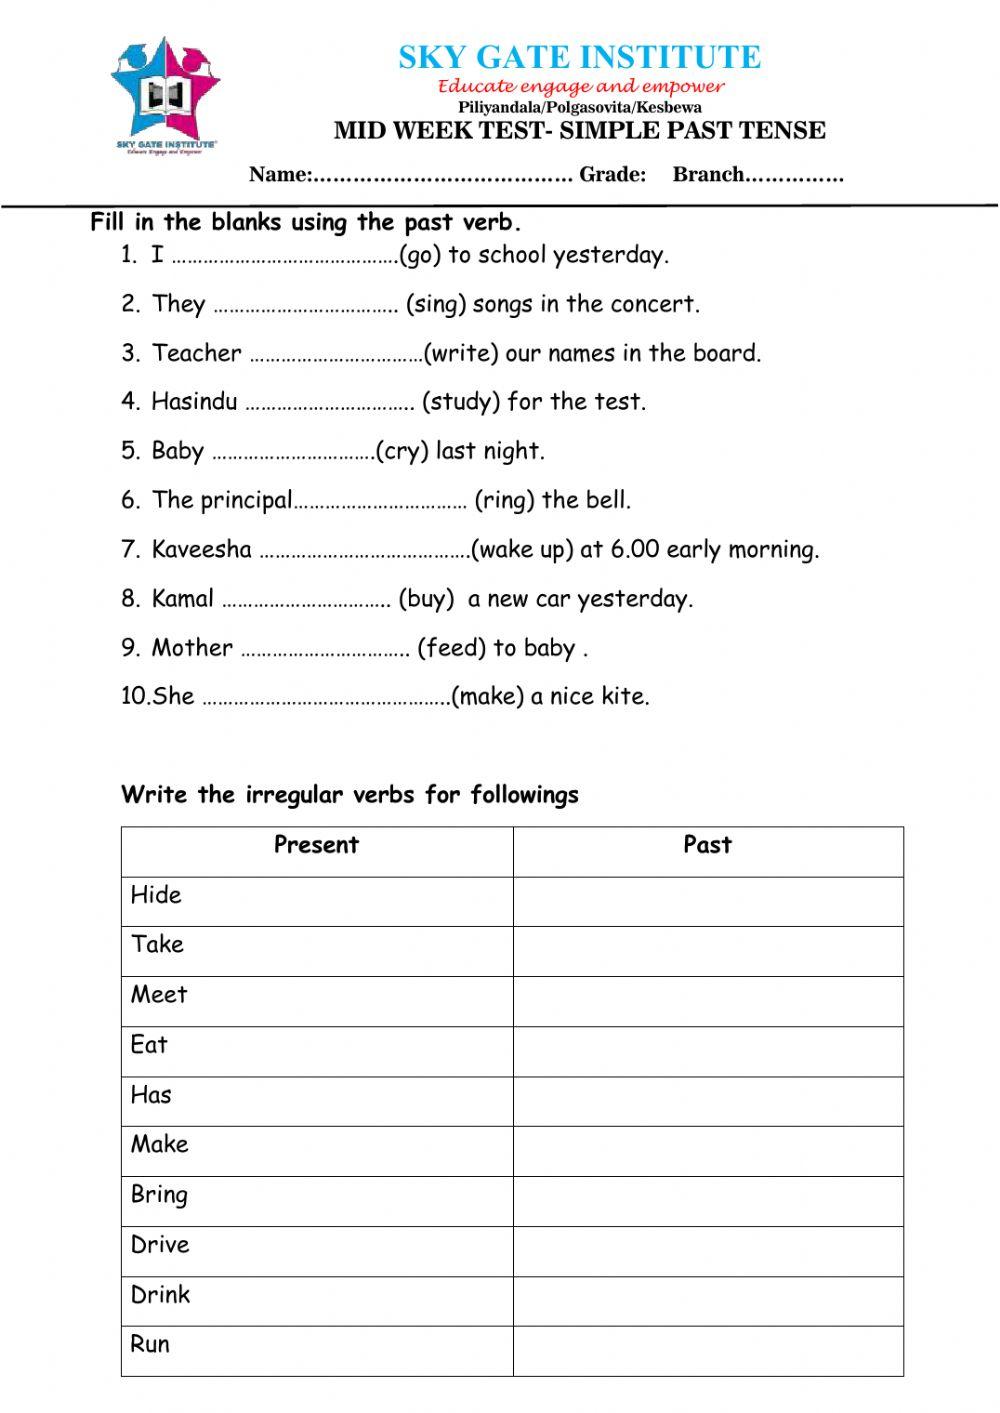 Revise irregular verbs Write the simple past tense and the past